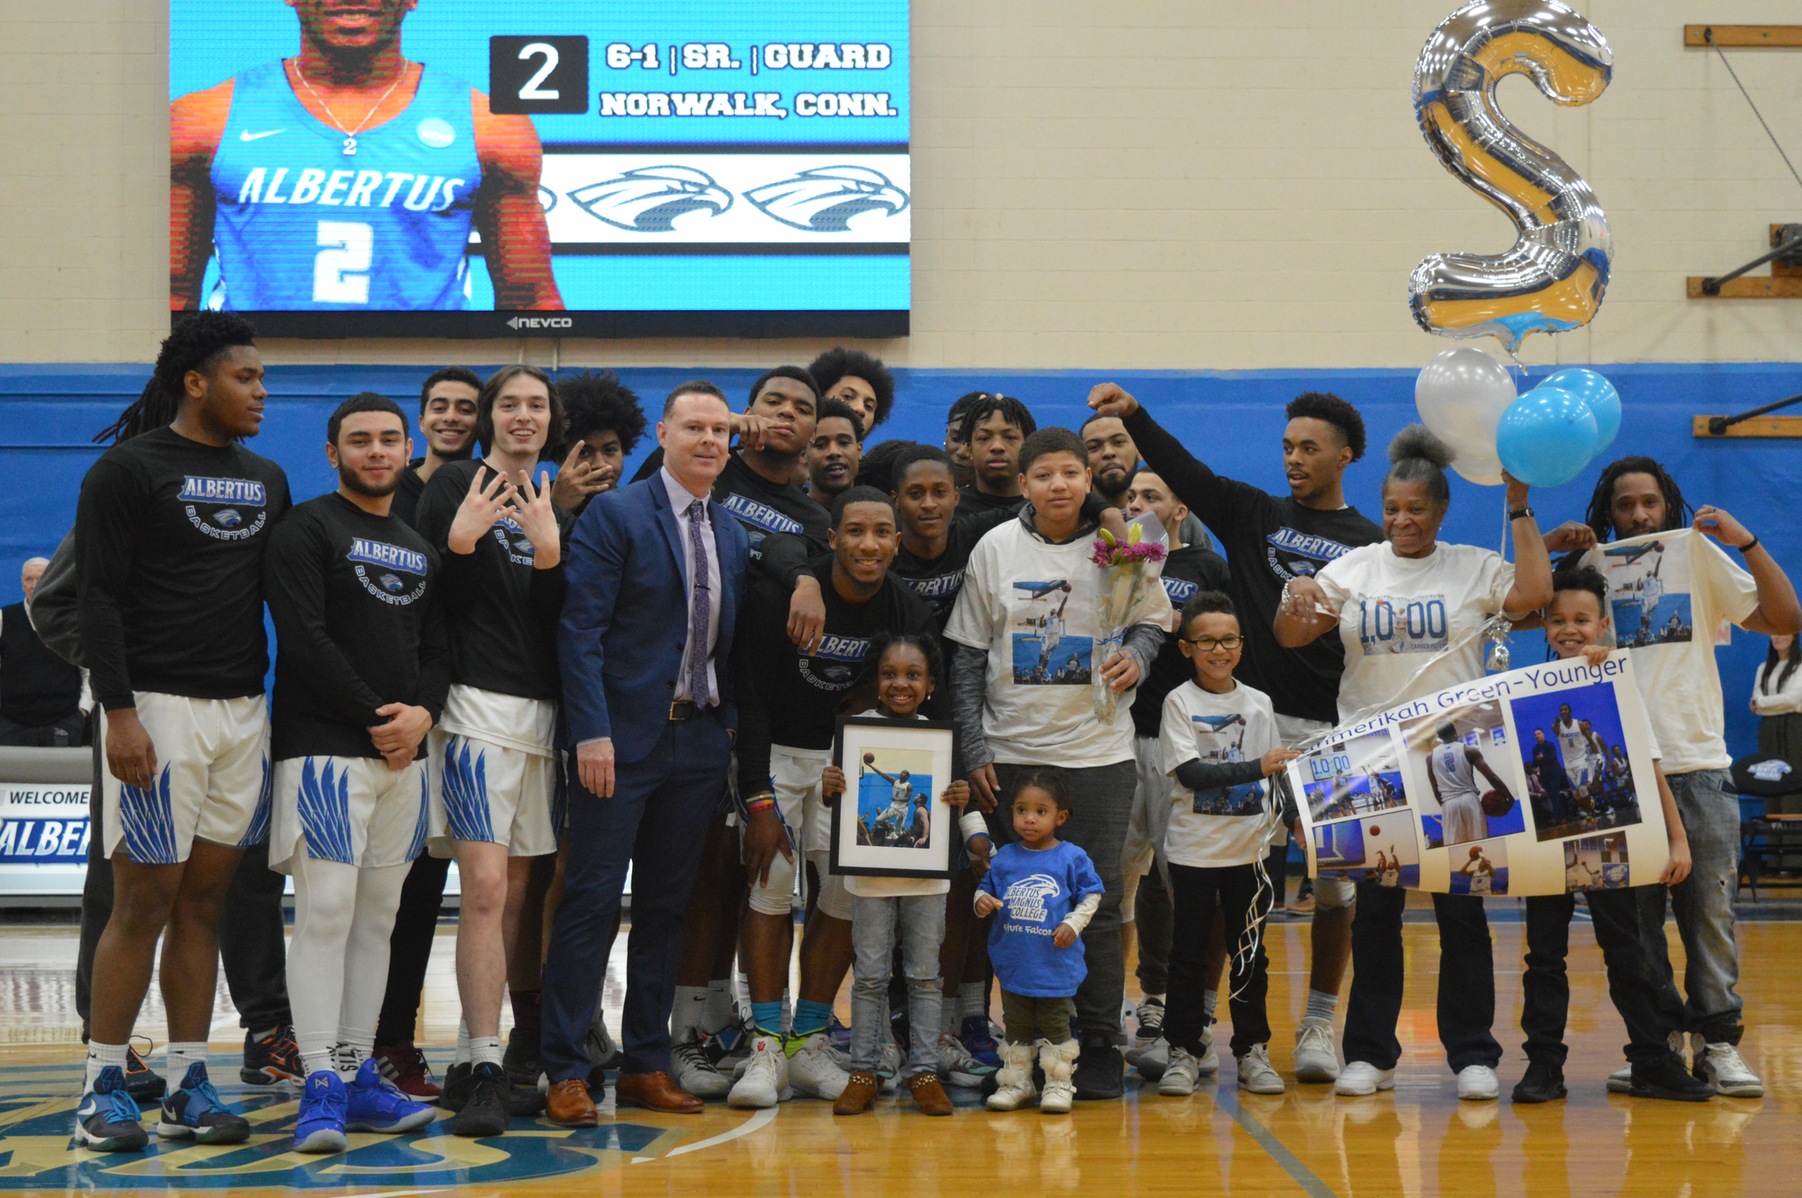 Falcons Come Up Big on Senior Night with 97-82 Victory over Emmanuel (Mass.)